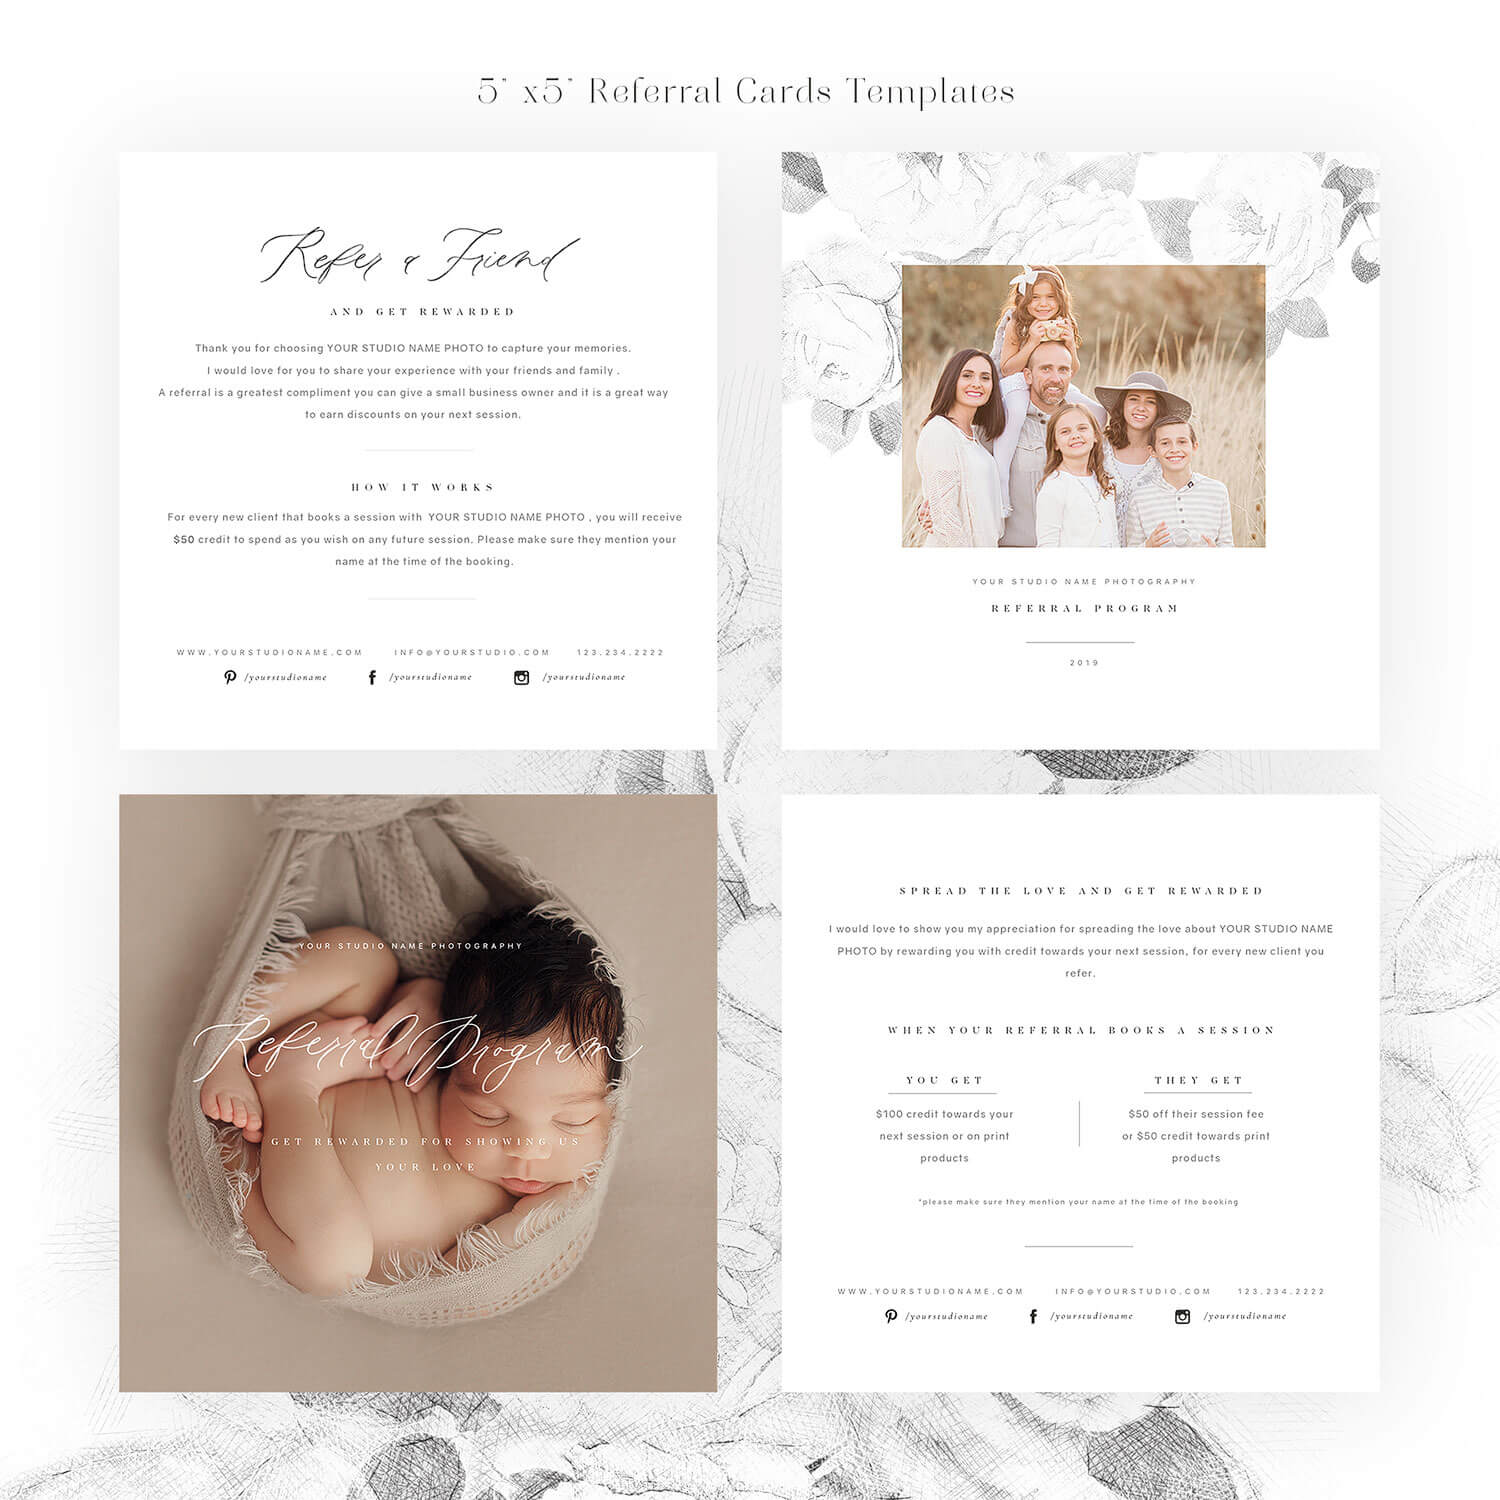 Referral Love 5×5 Card Templates Pertaining To Photography Referral Card Templates